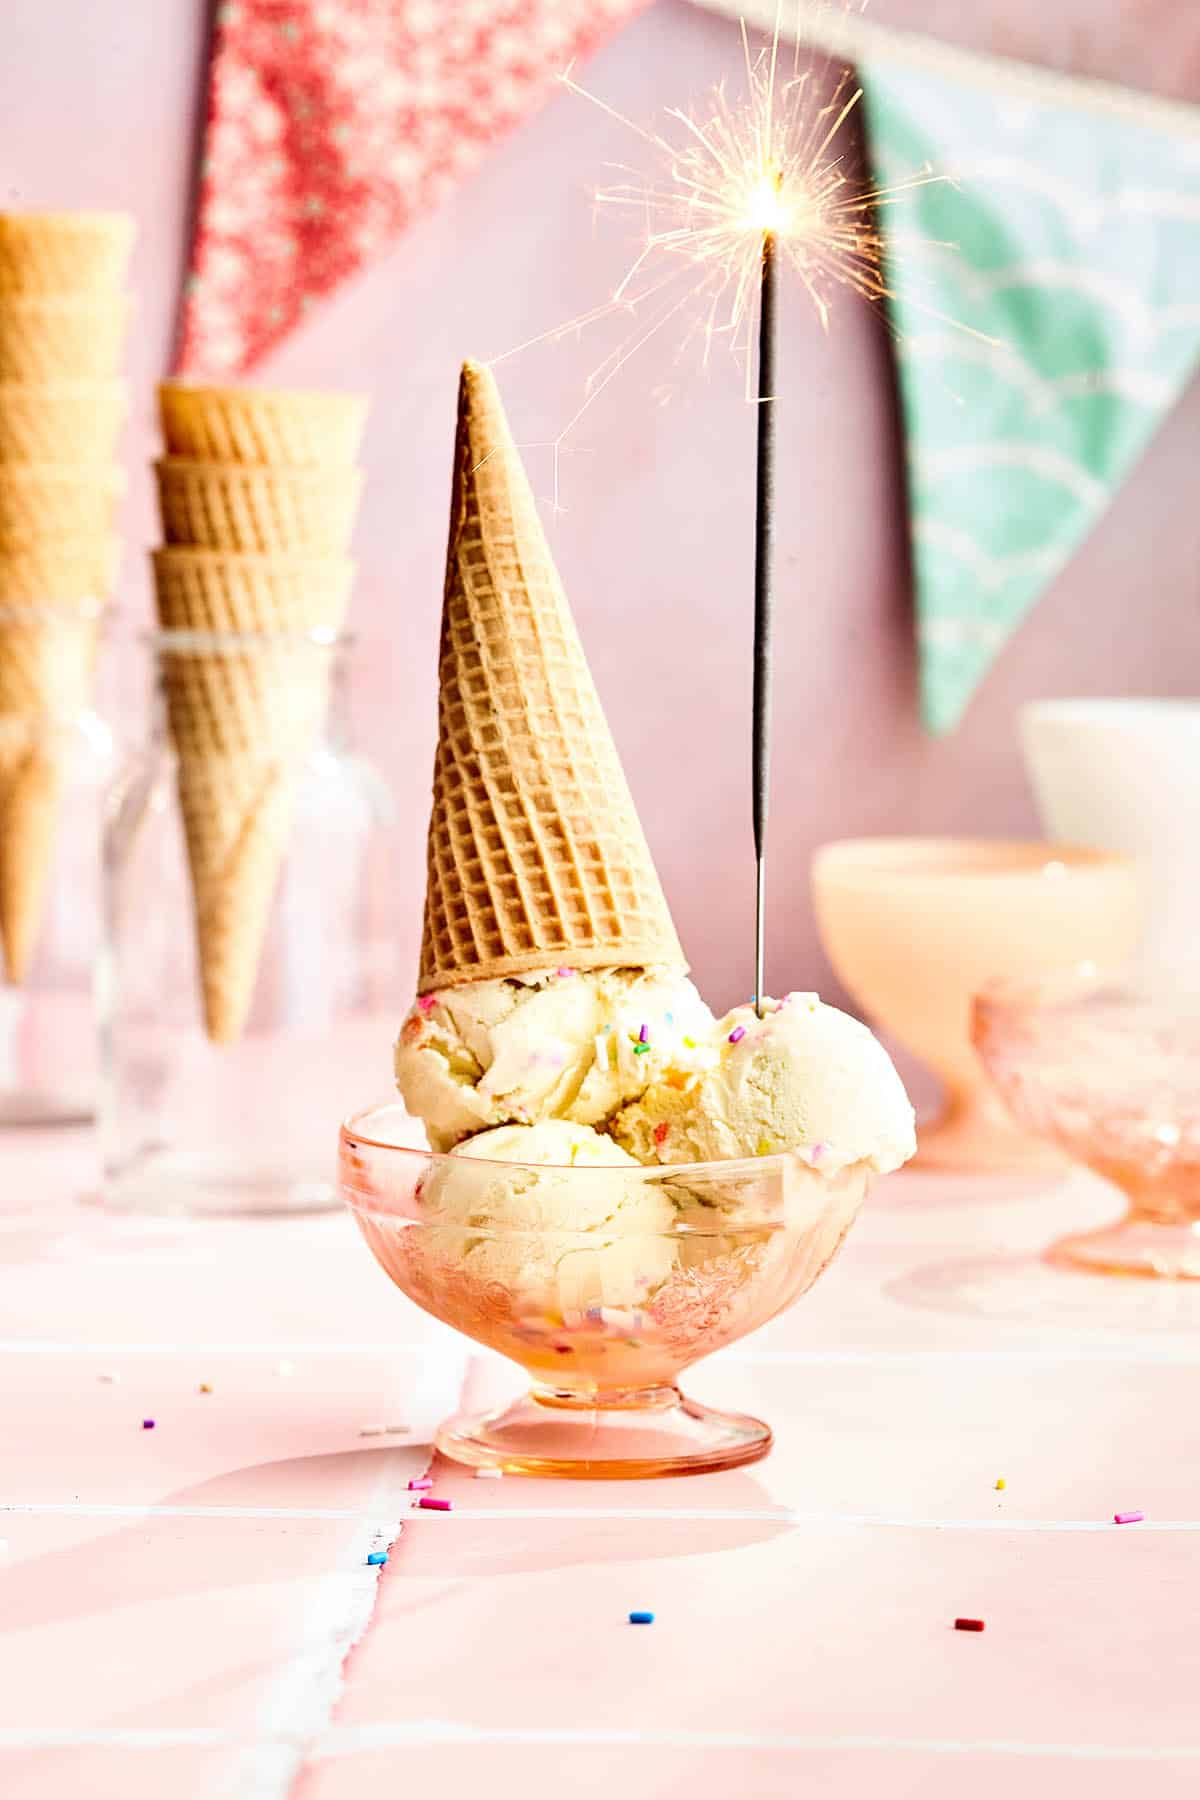 Three scoops of ice cream in a pink glass dish with a sparkler and upside-down ice cream cone.